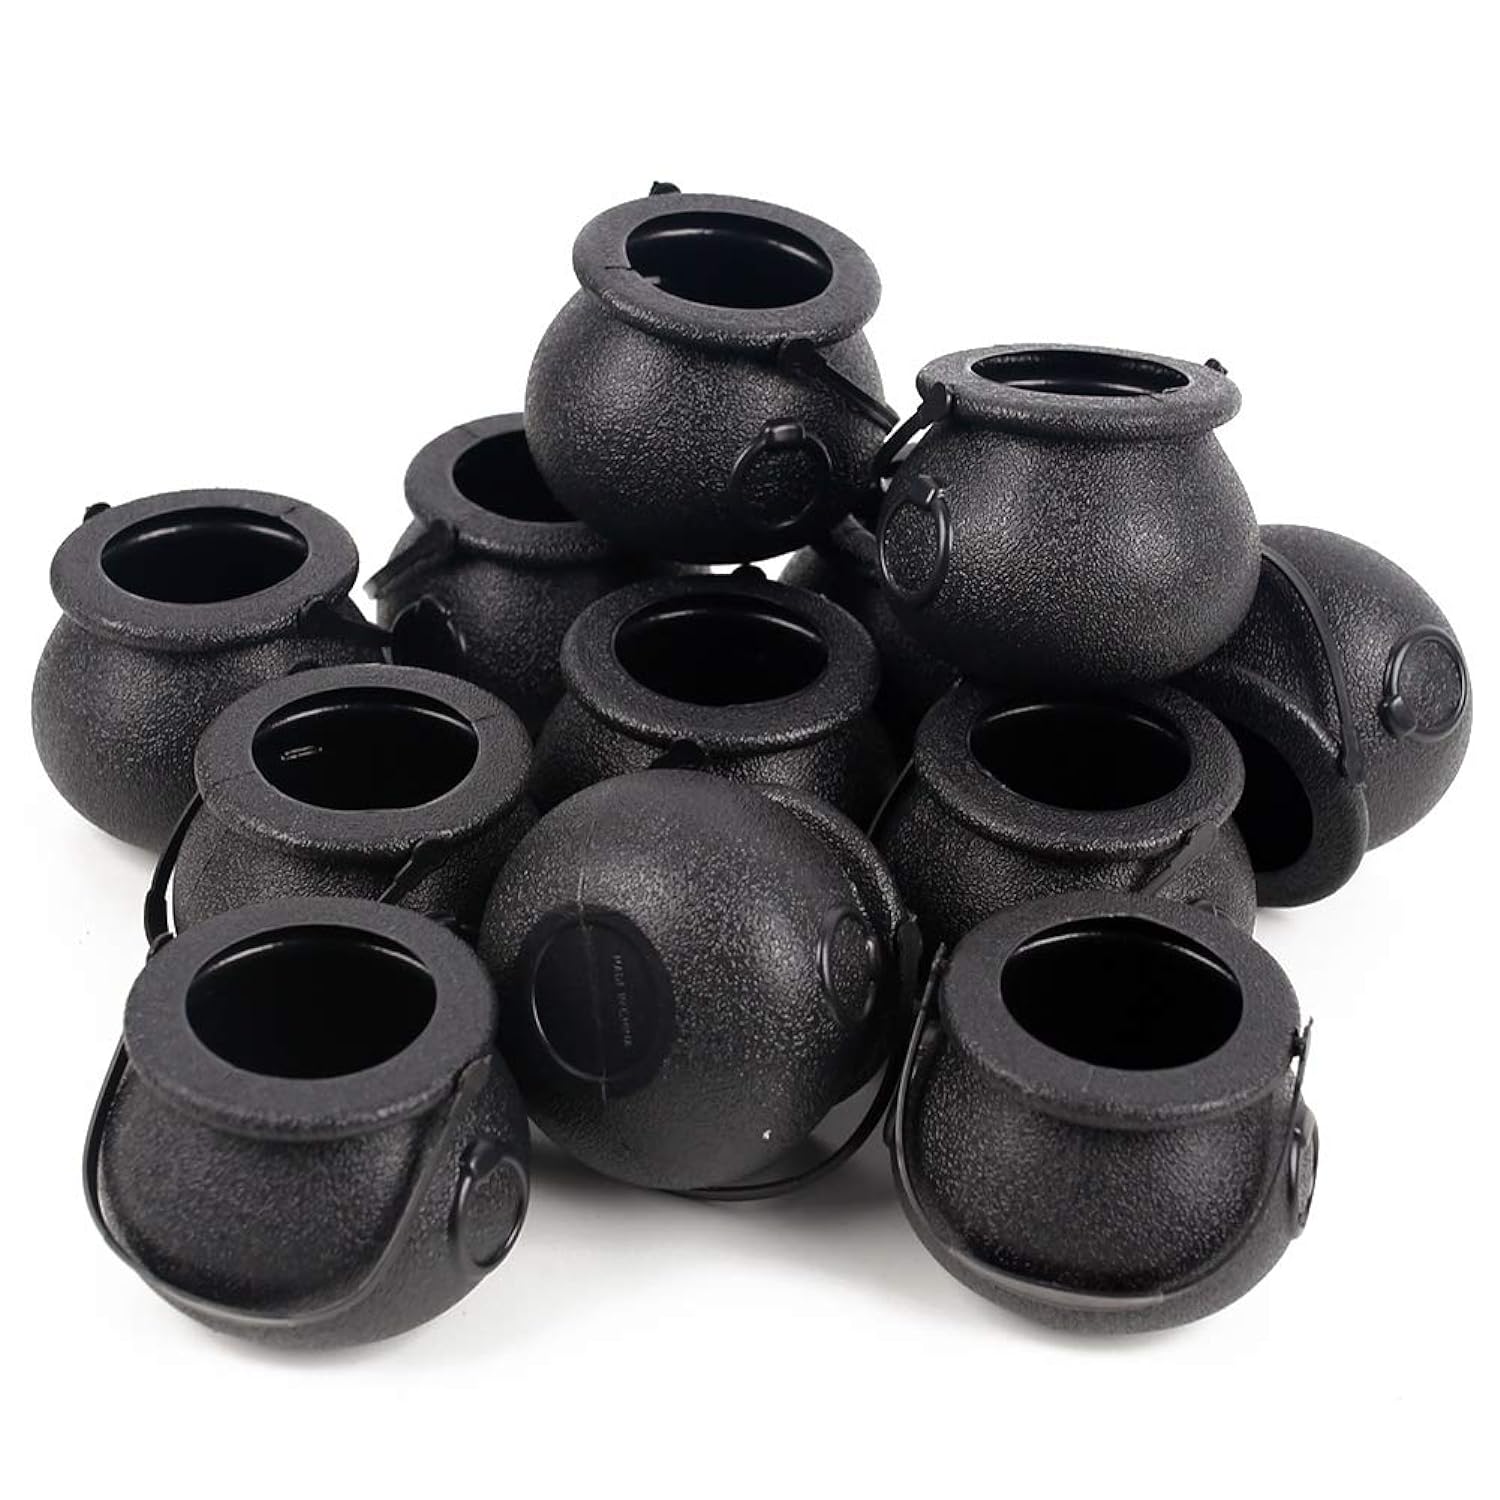 EBD Products Mini Black Candy Cauldron Kettles, 12Pcs Plastic Candy Kettles Party Decoration Supplies For St. Patricks Day